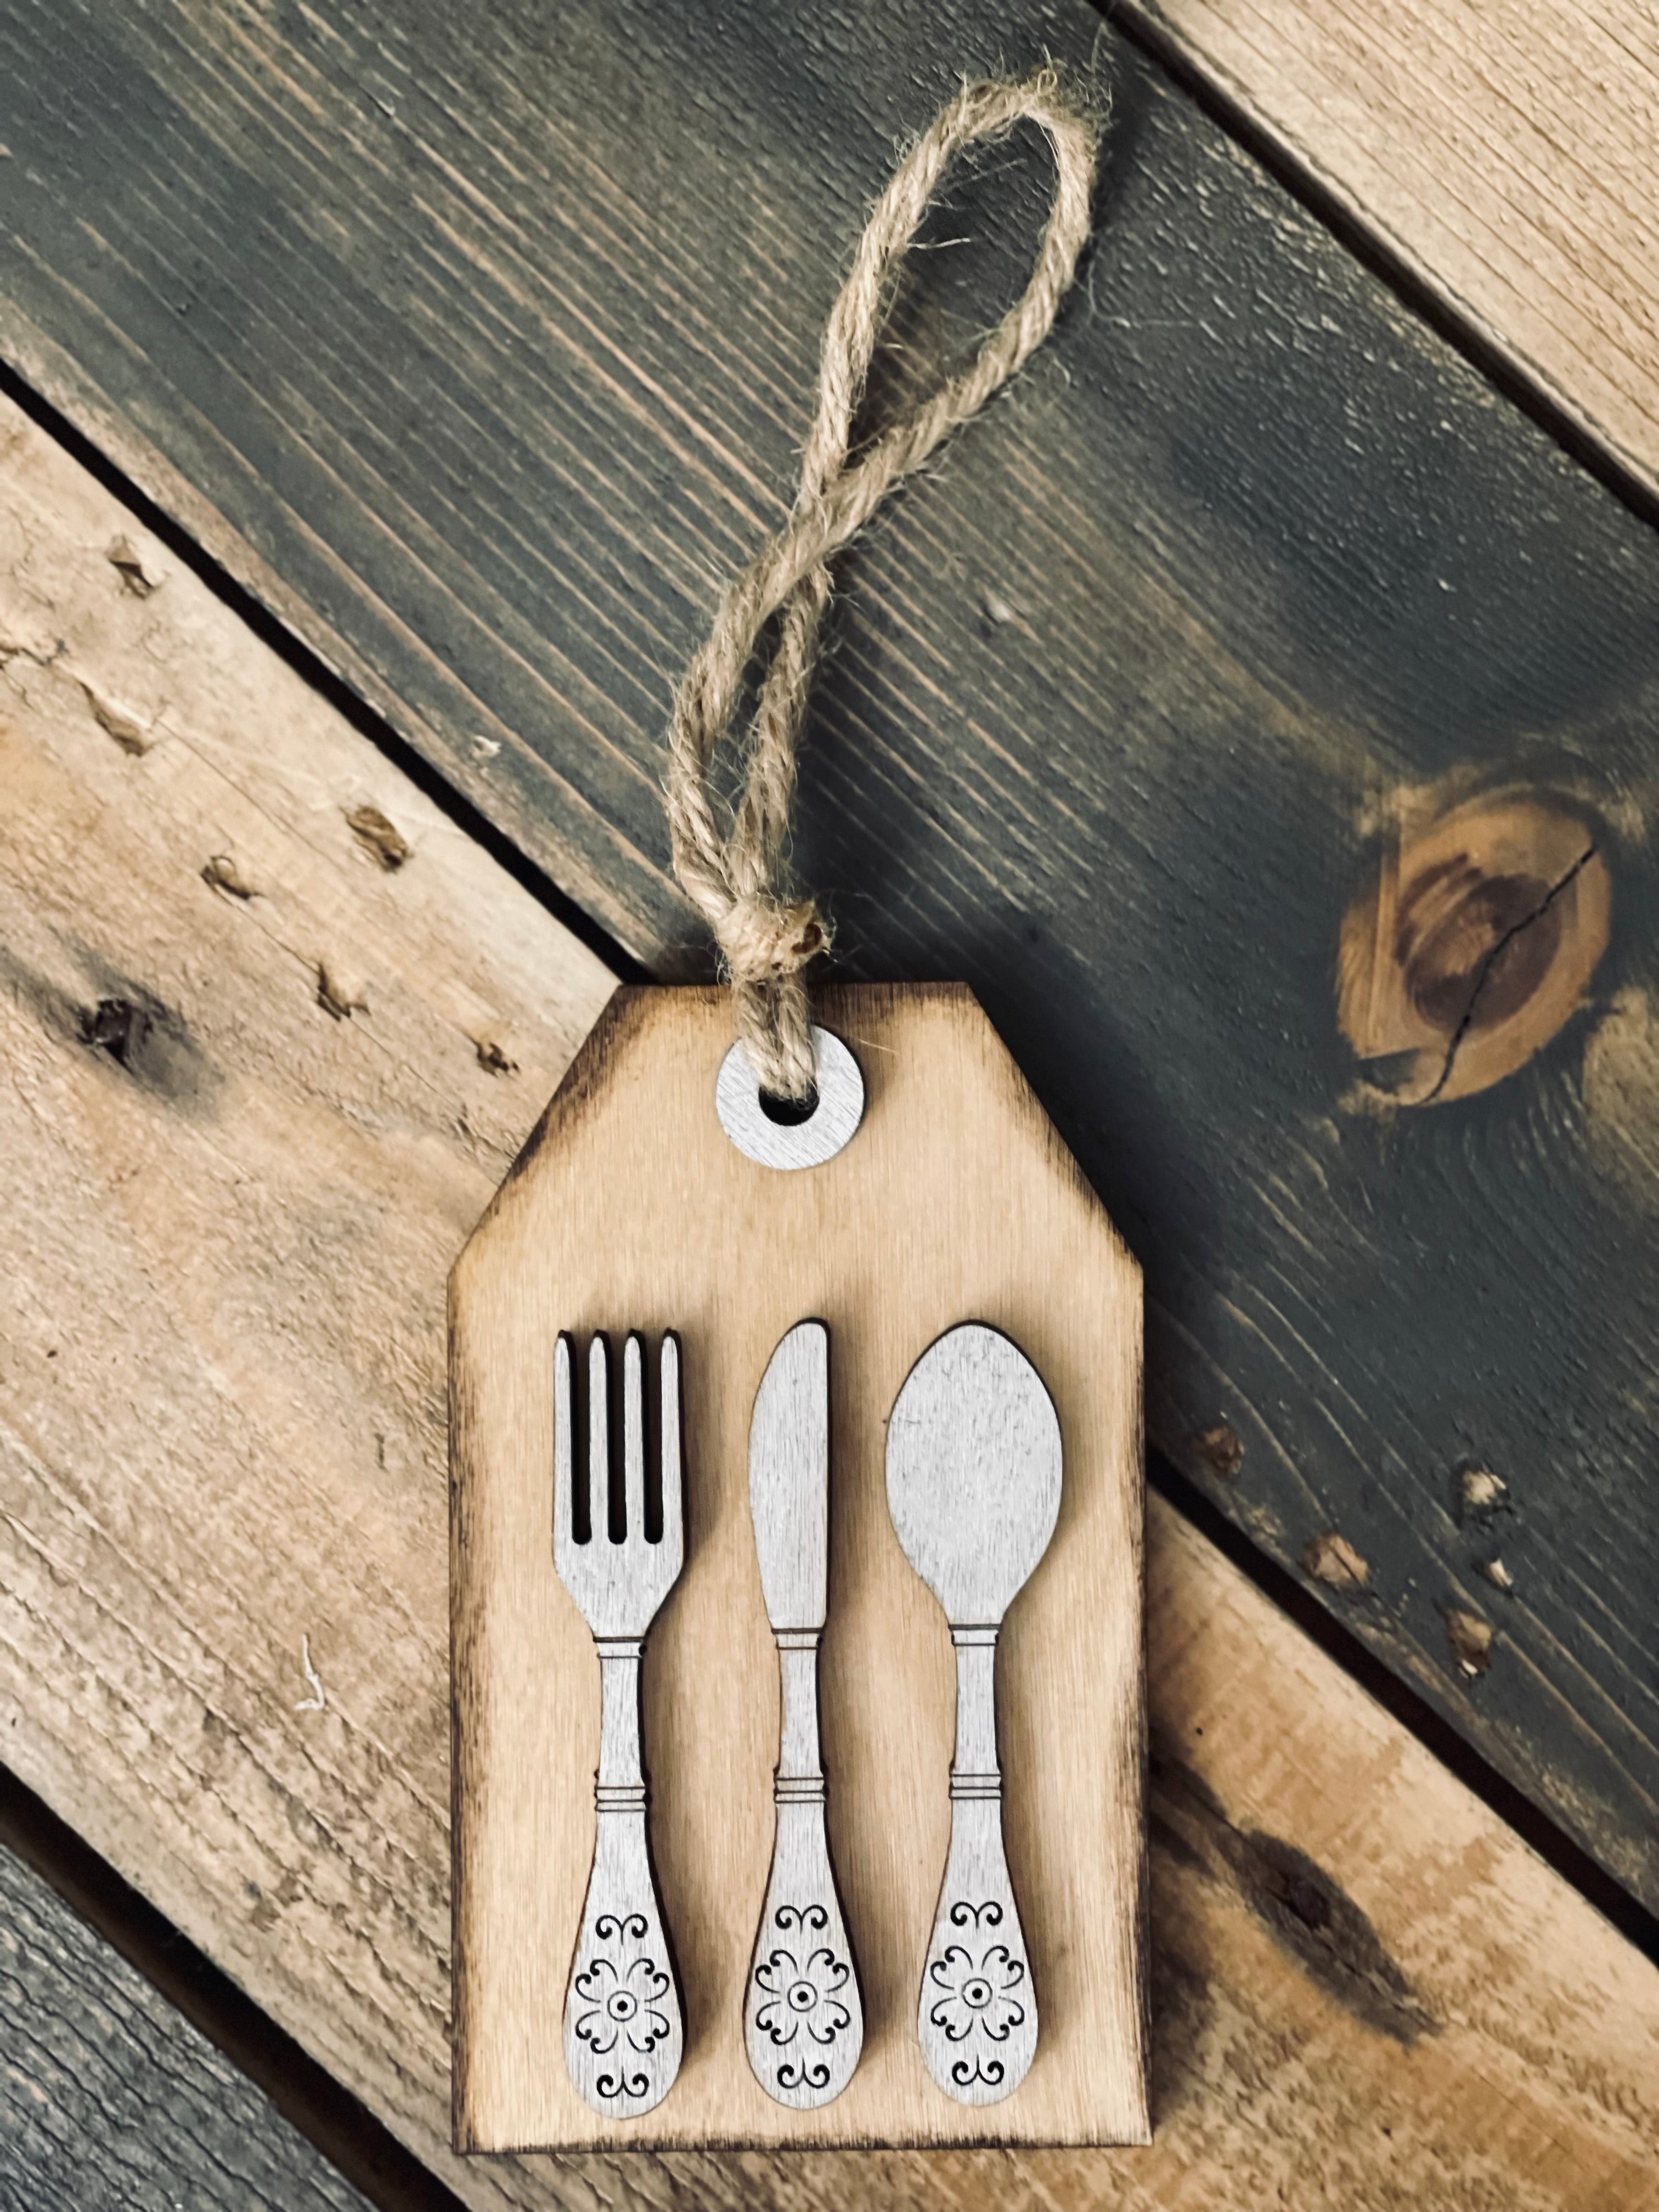 This image show the full view of the gift tag silverware set.